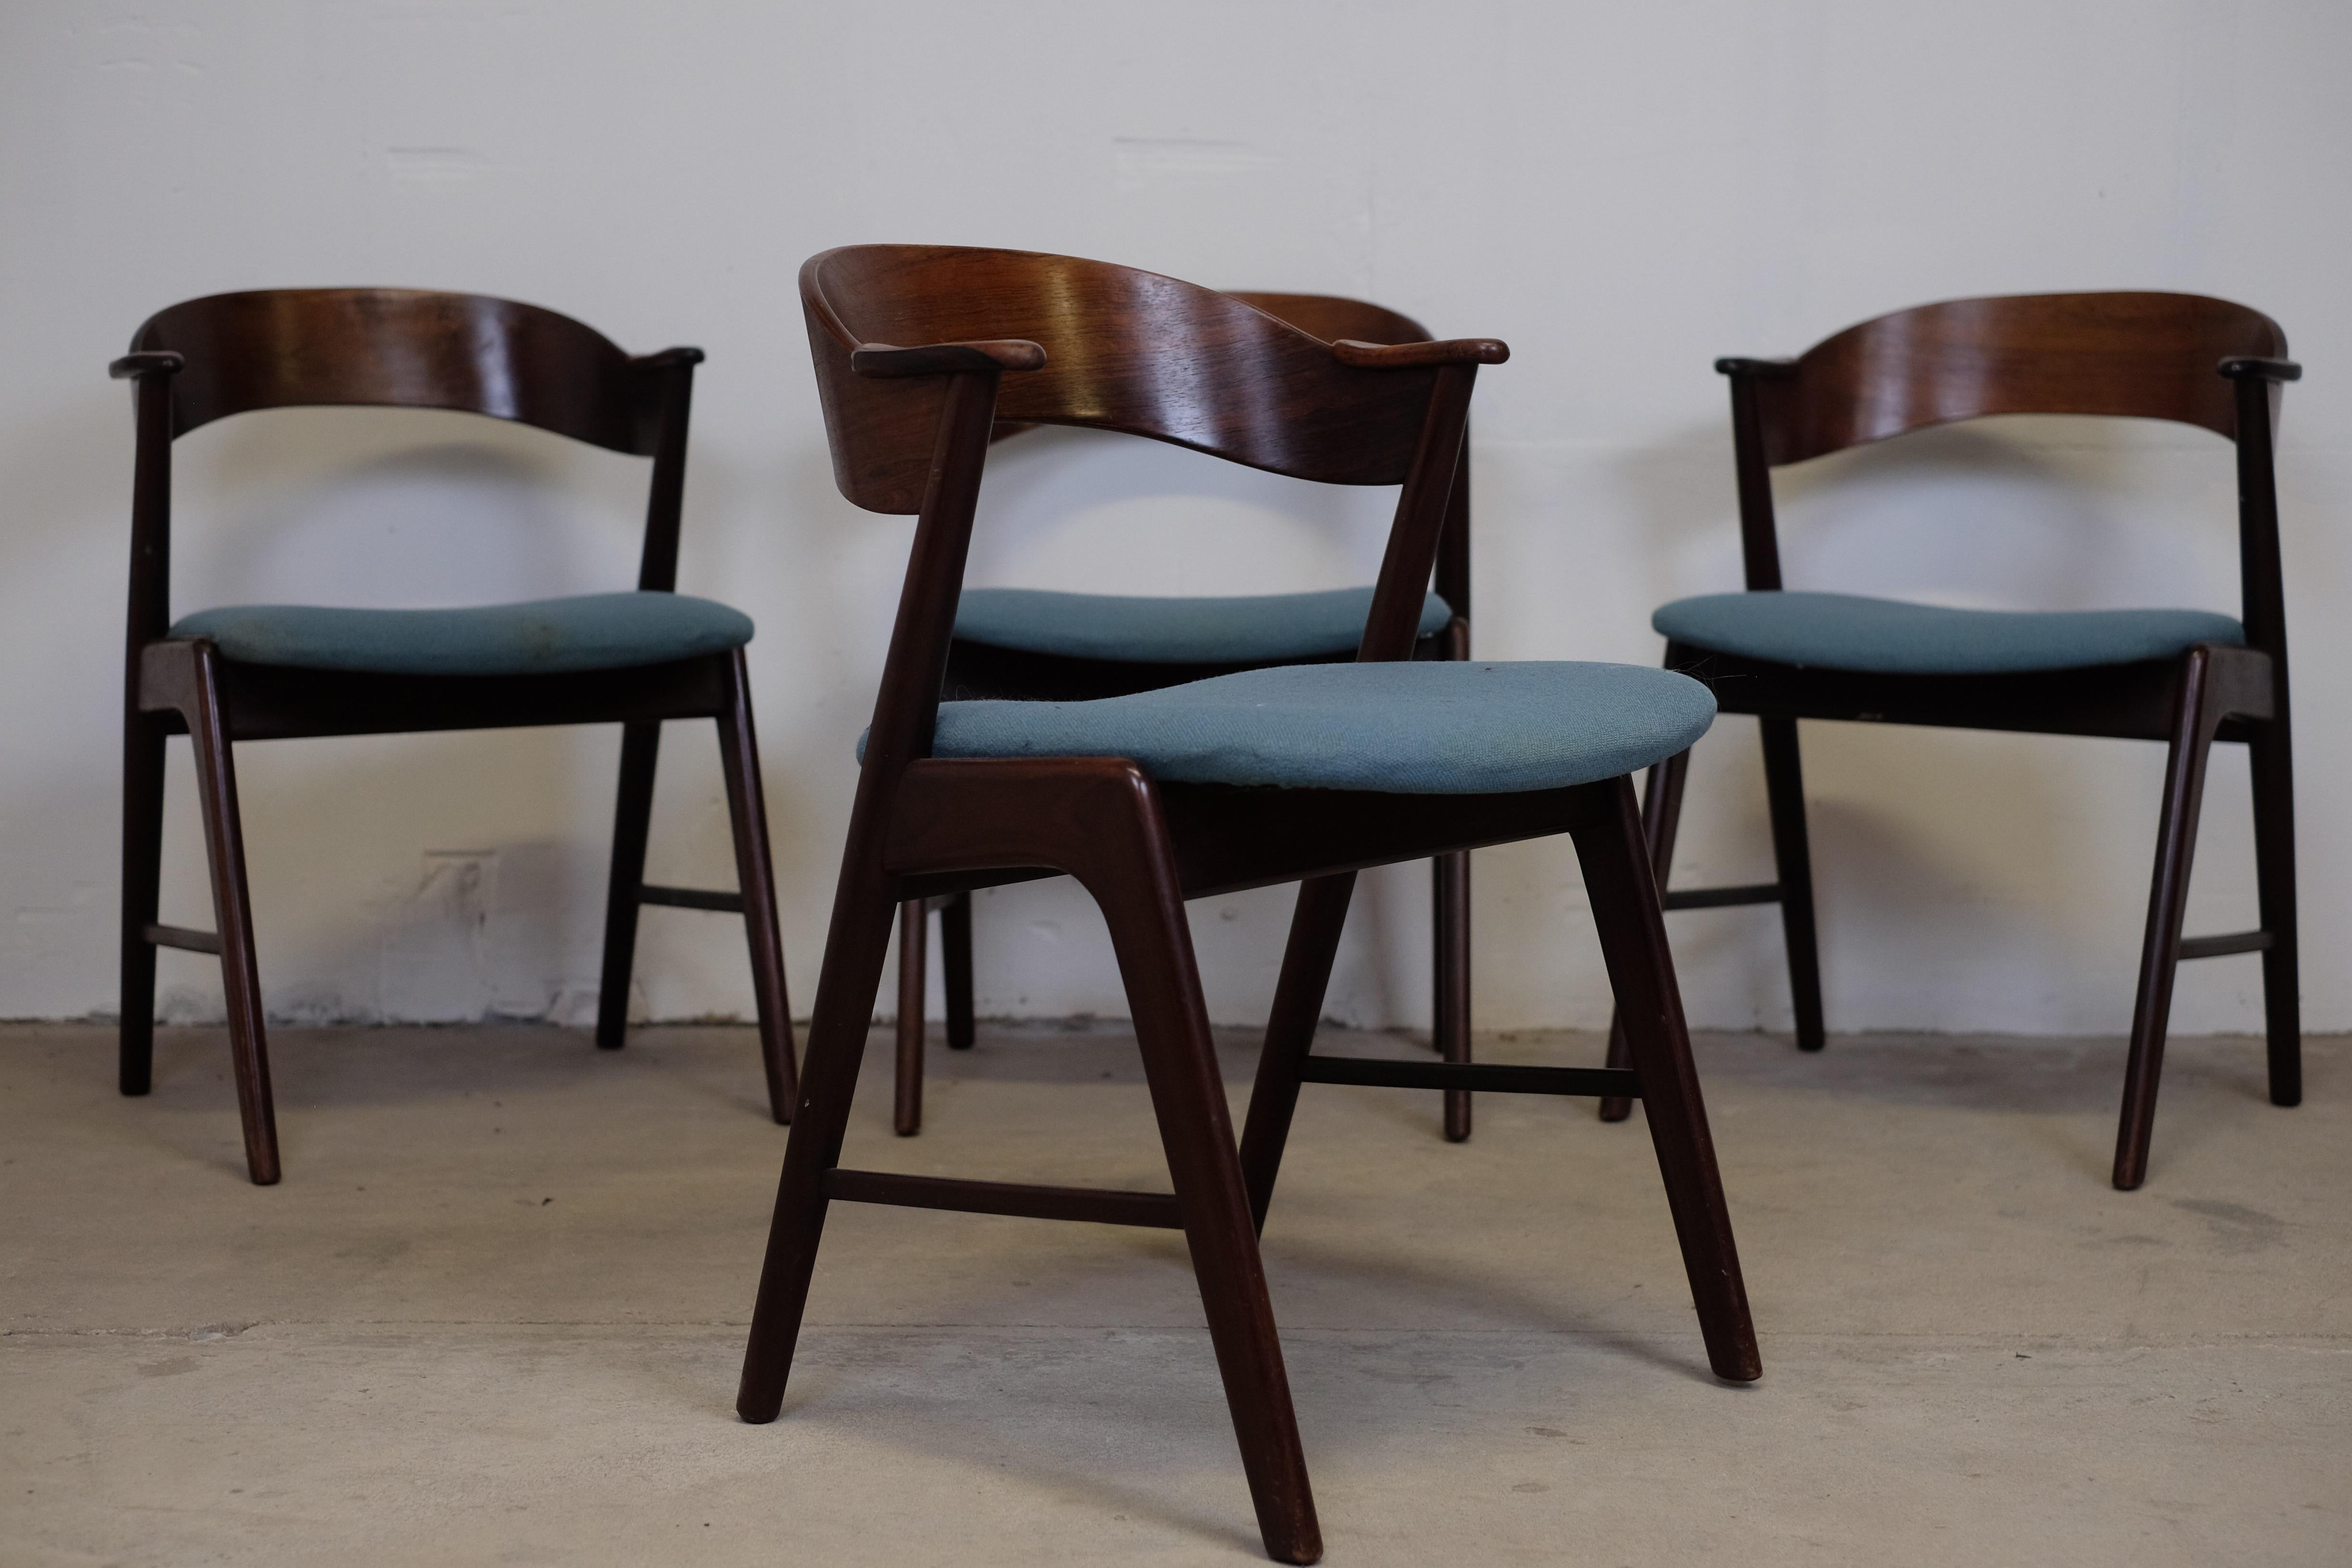 Very beautiful set of four dining chairs by Kai Kristiansen for Korup Stolefabrik. The chairs feature a comfortable curved back in rosewood with beautiful armrests also in rosewood. Stamped 